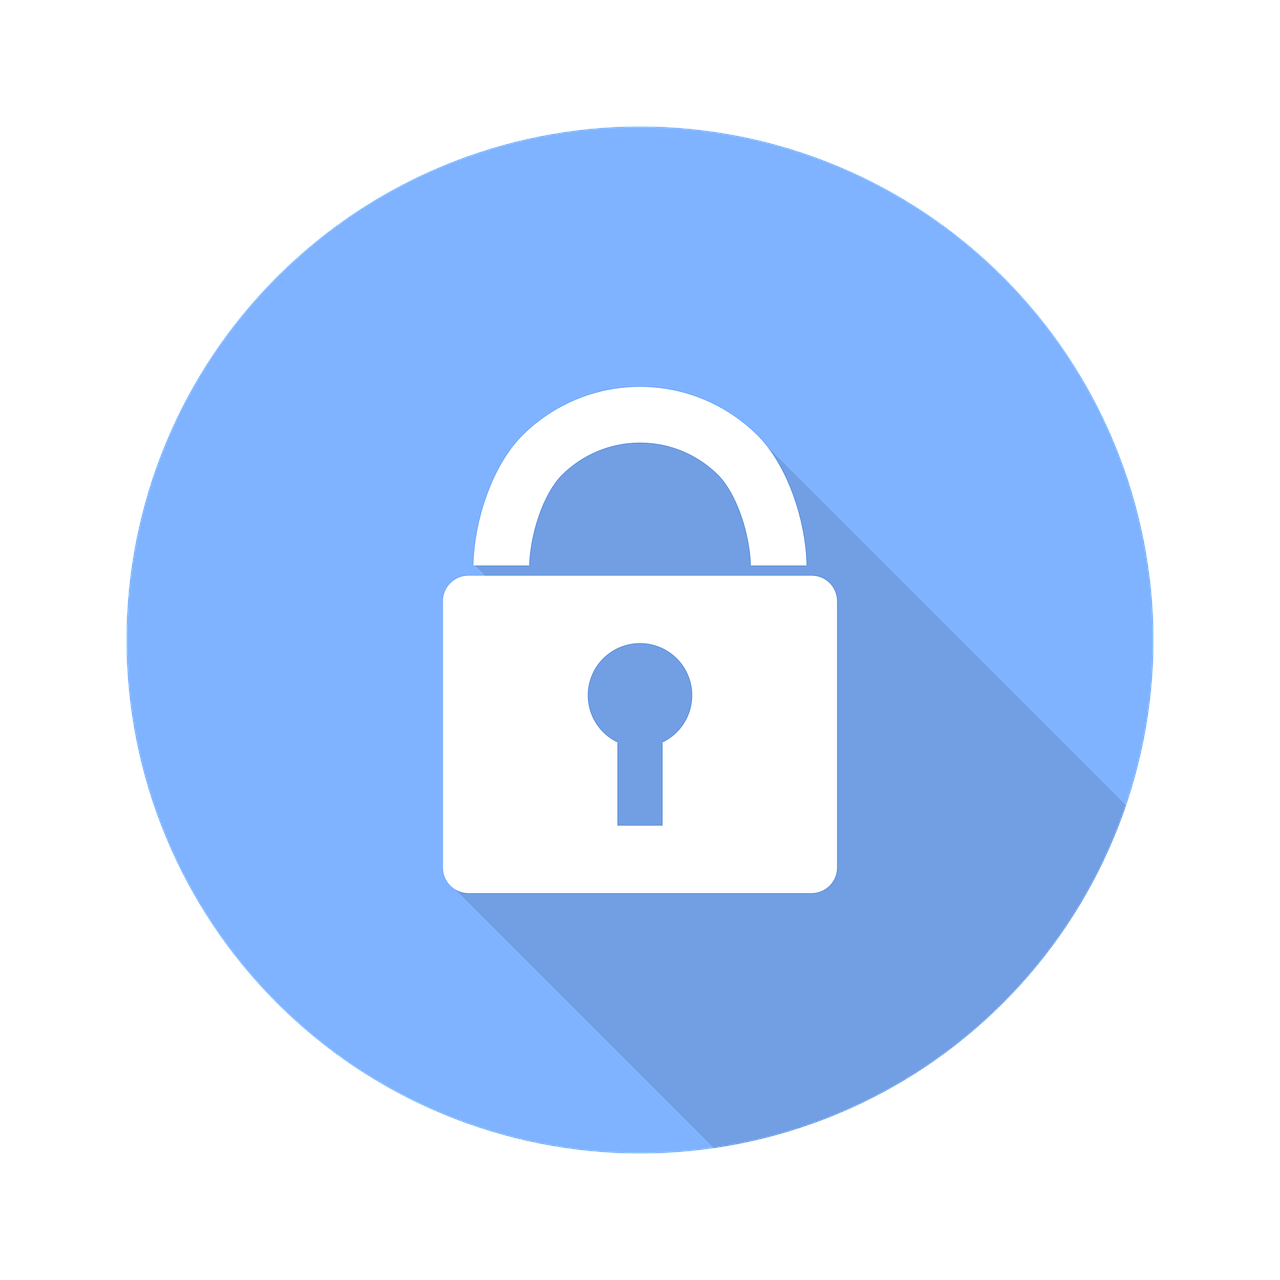 cyber security, security, lock icon